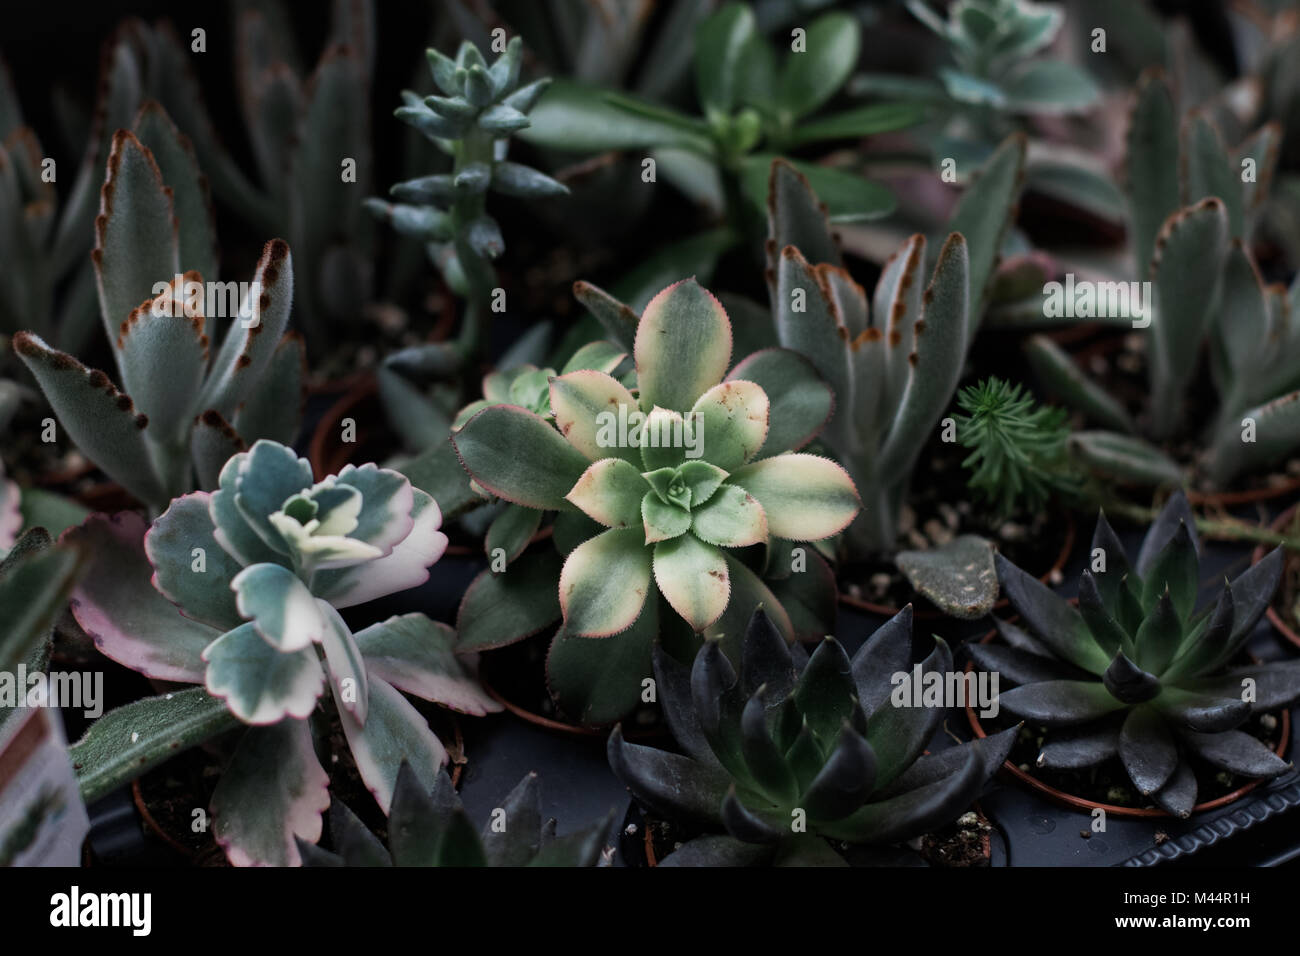 Succulents and tiny plants in natural light Stock Photo